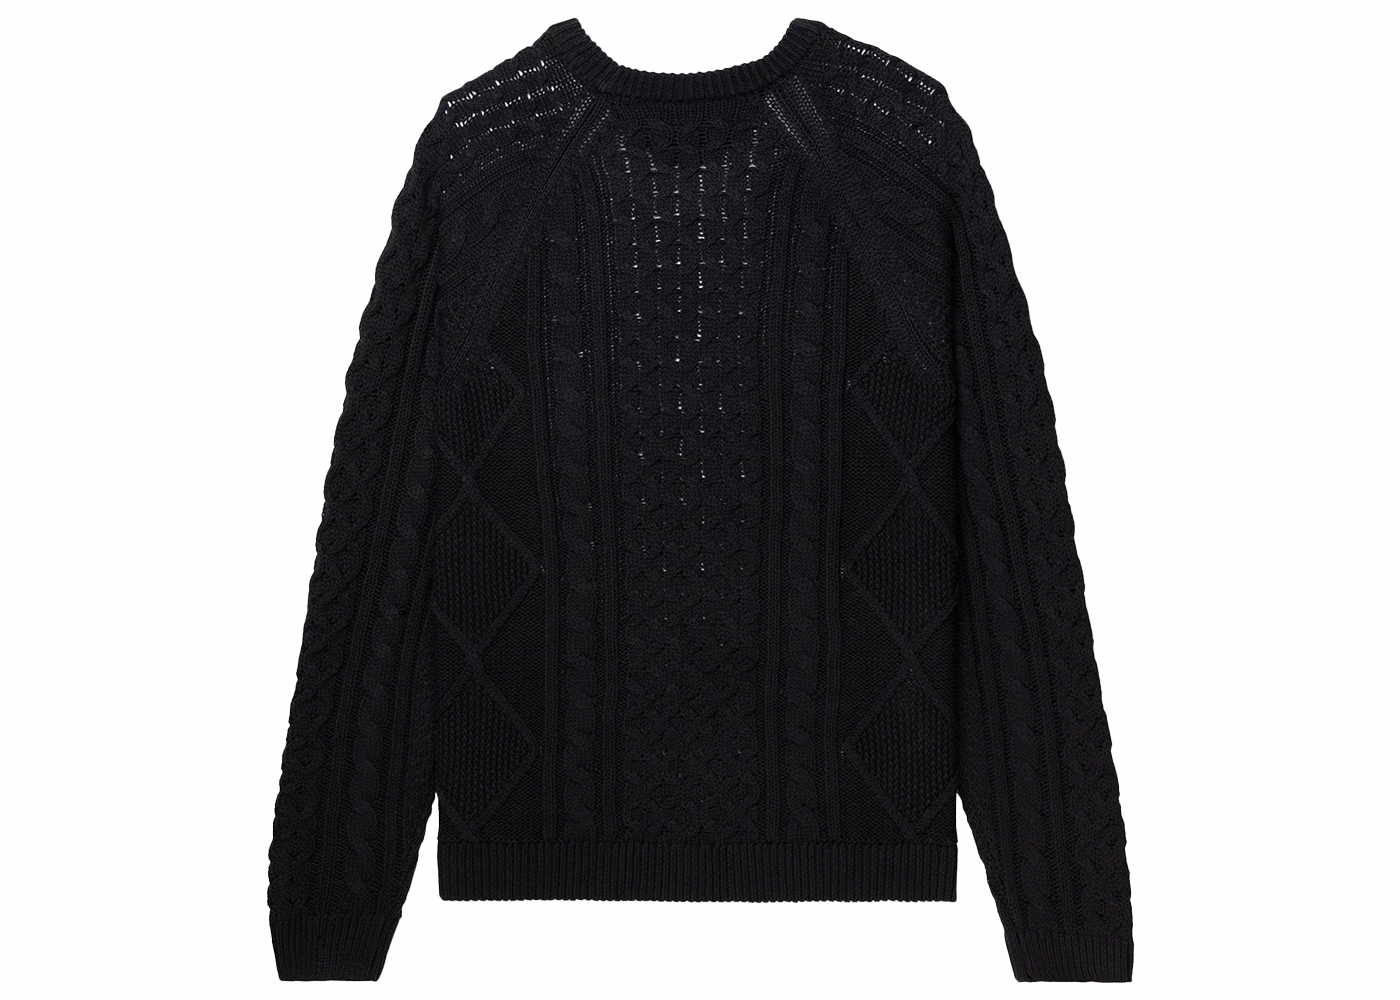 Nike Cable Knit L/S Sweater (Asia Sizing) Black